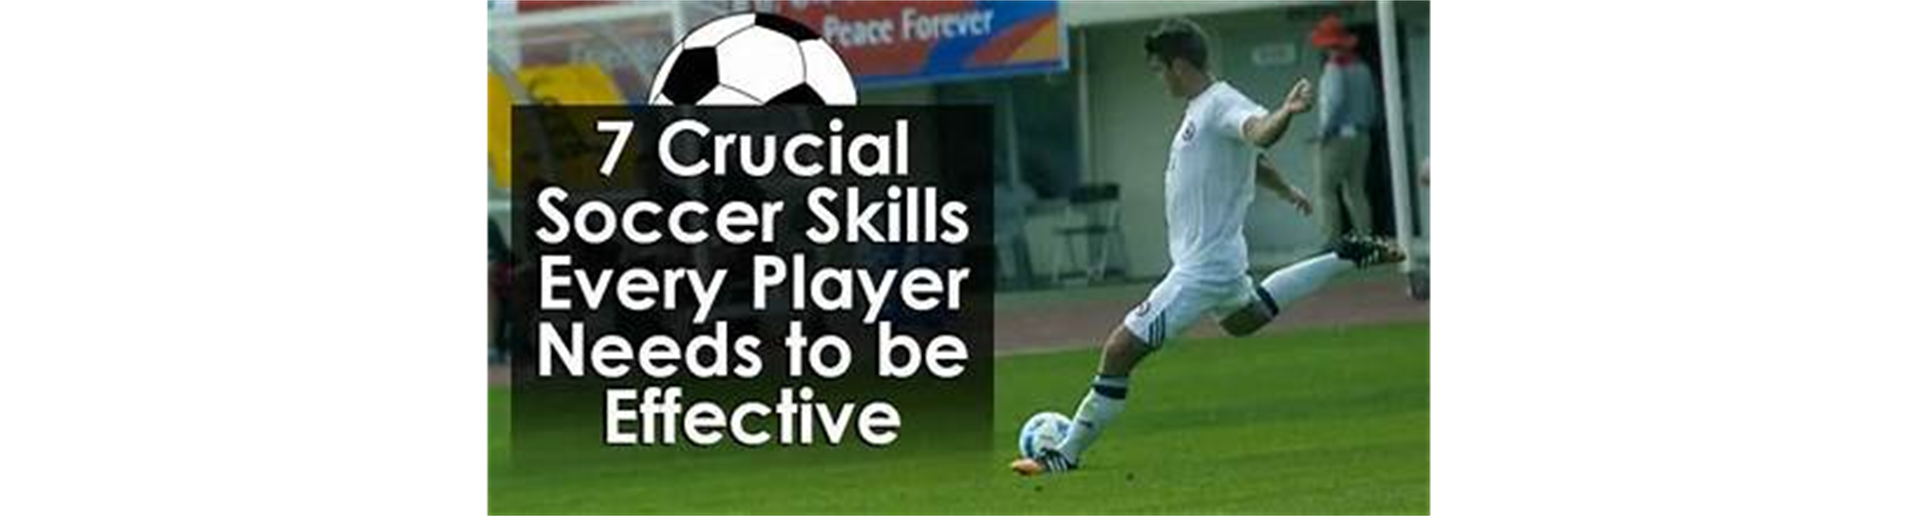 7 Crucial Soccer Skills Every Player Needs to be Effective